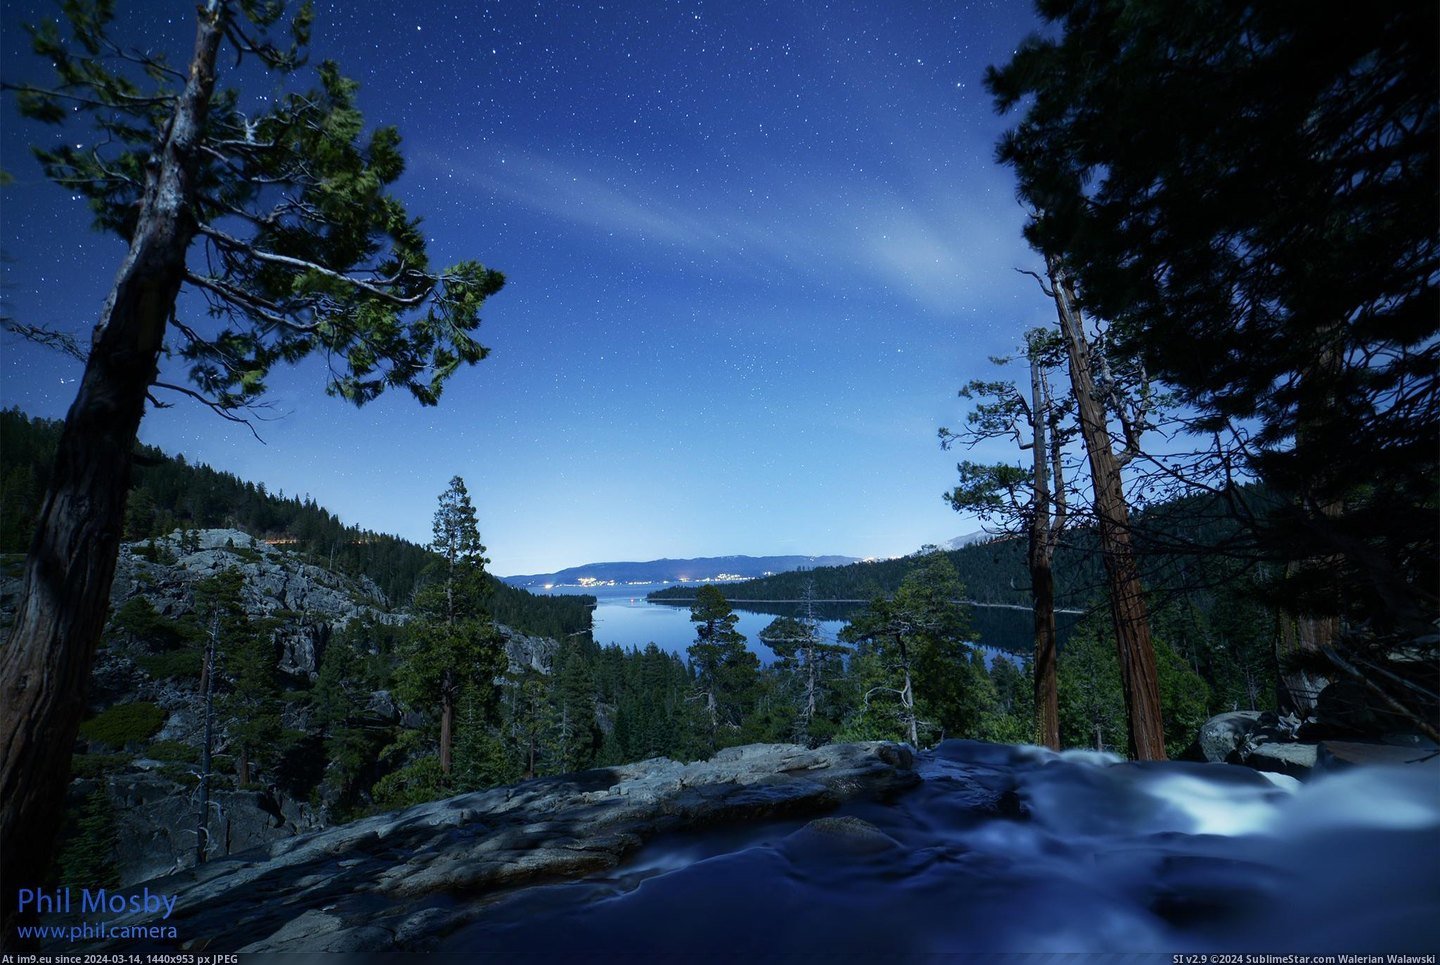 #Night #Lake #Falls #Tahoe #Emerald #2048x1367 #Phil #Bay #Stars #Eagle [Earthporn] Stars over Eagle Falls - Emerald Bay, Lake Tahoe, the night before last [oc by Phil Mosby][2048x1367] Pic. (Image of album My r/EARTHPORN favs))